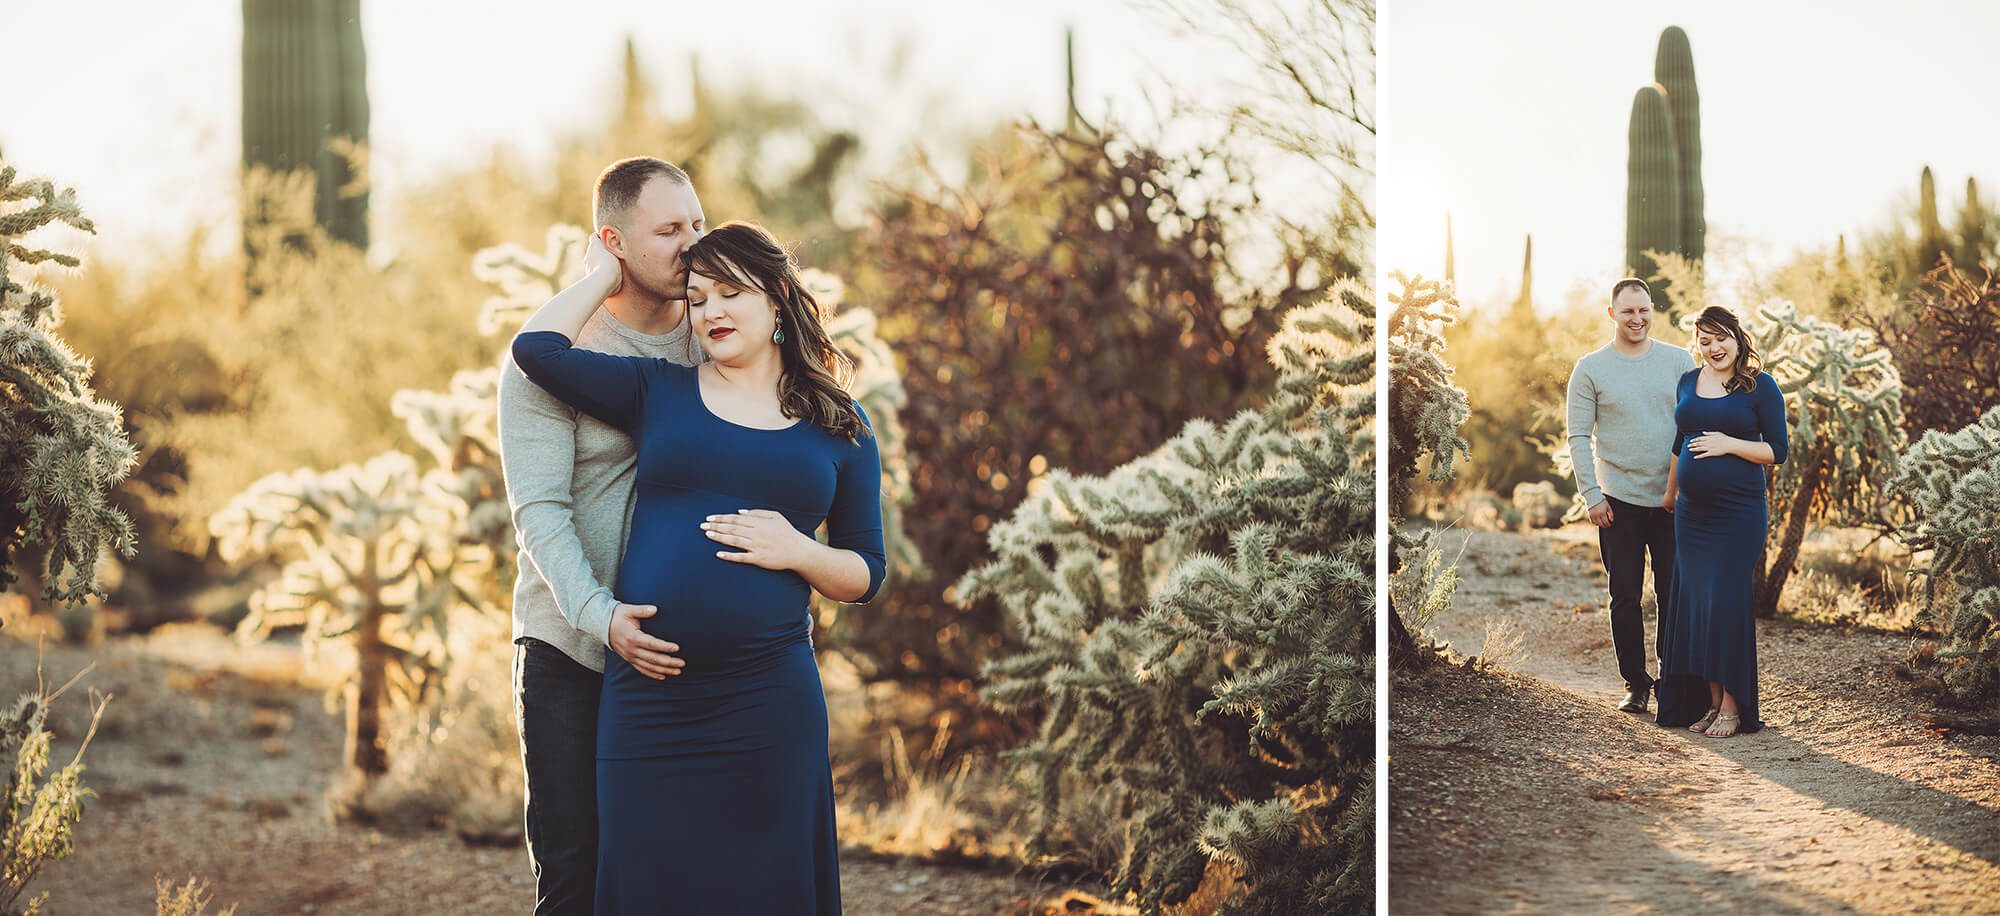 At Broadway Trailhead in Saguaro National Park, Alicia and her hubby at their maternity session